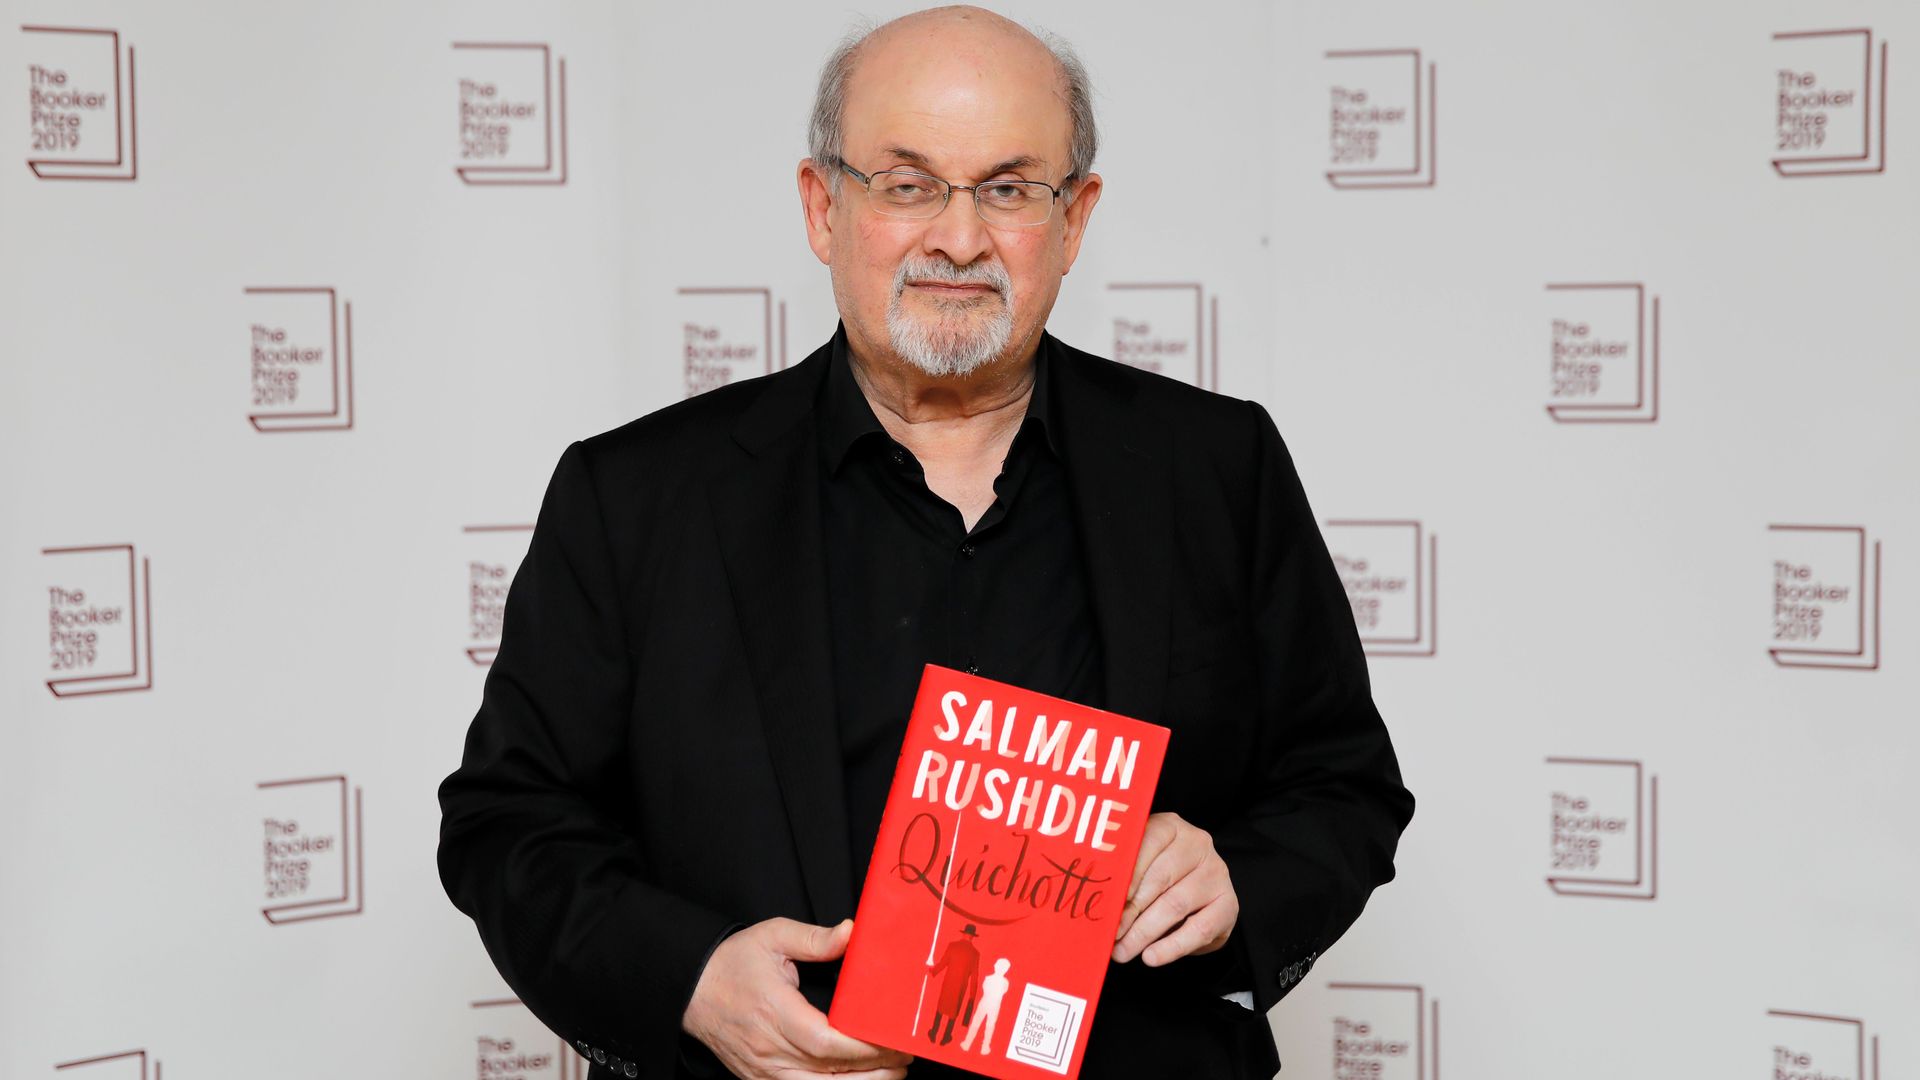 Author Salman Rushdie posing with a book in London in October 2019.